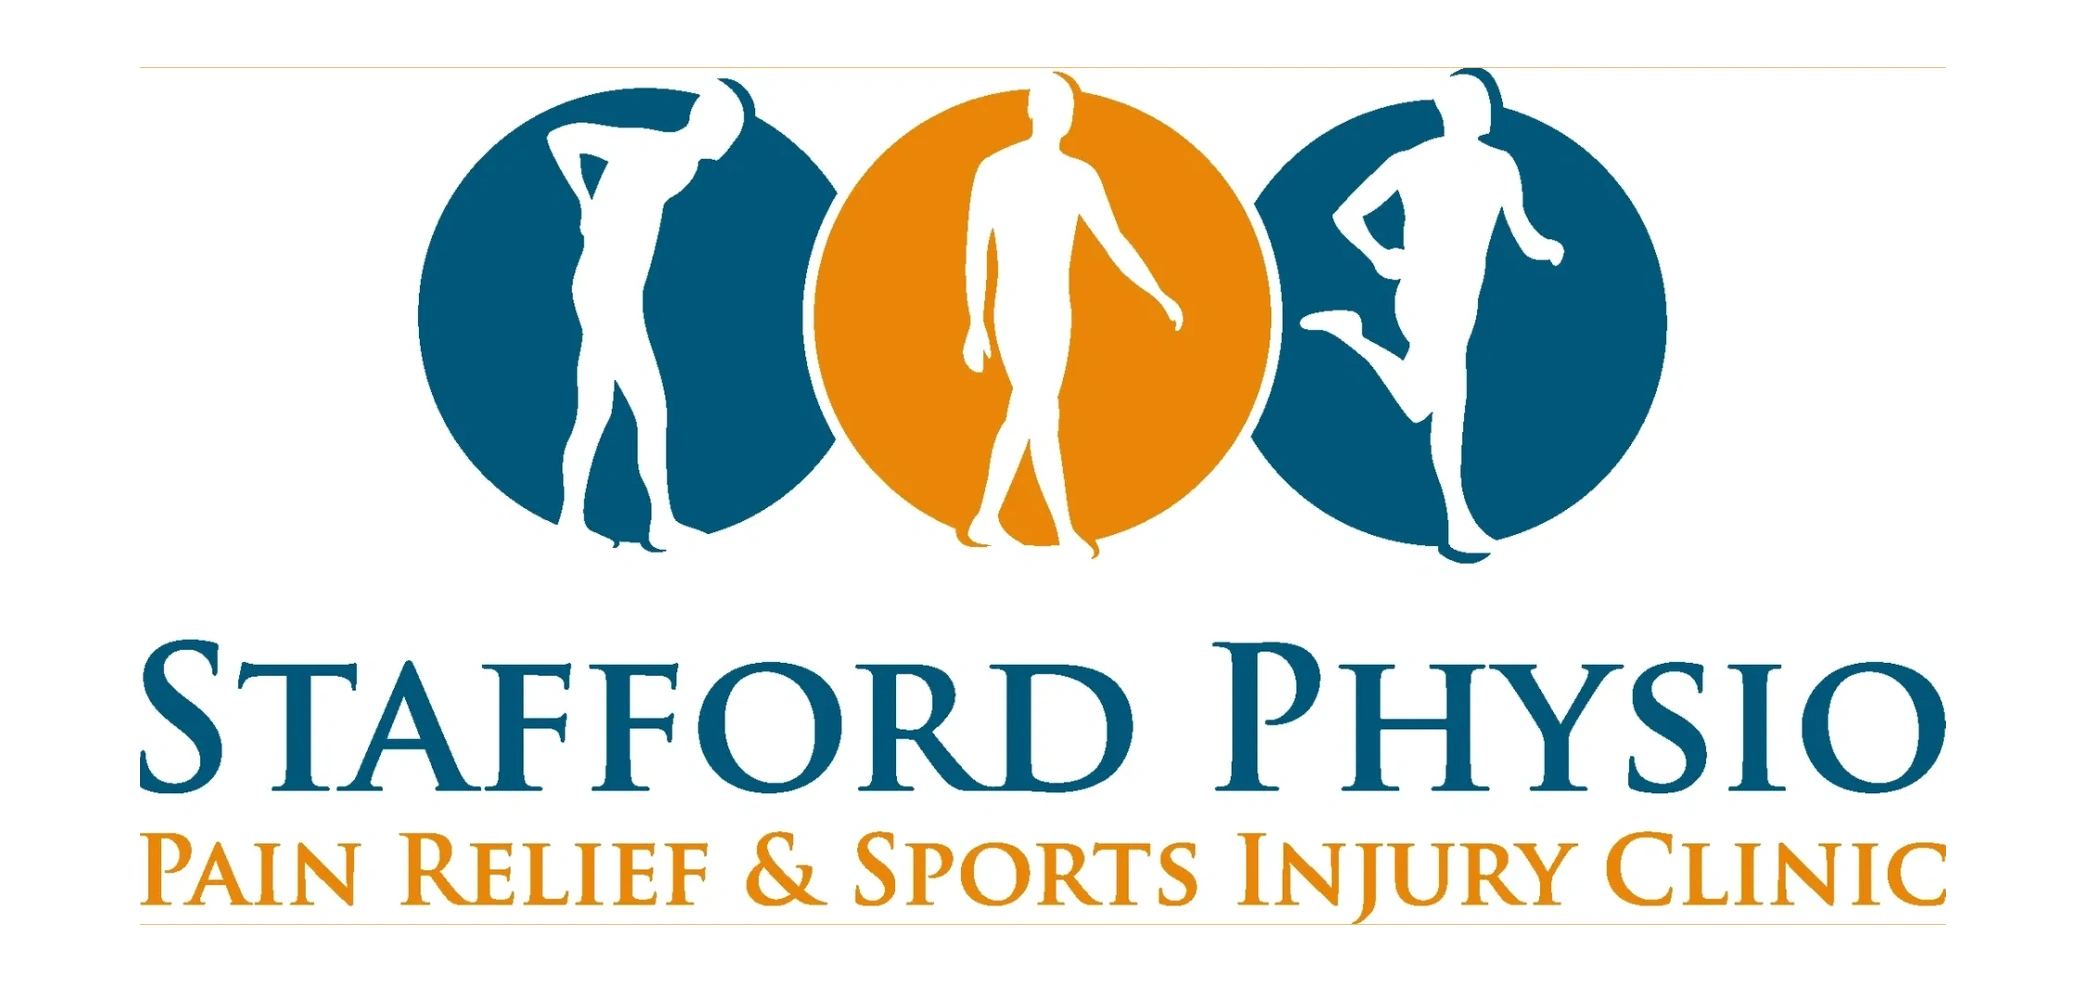 About us | Stafford Physio and Pain Relief Clinic